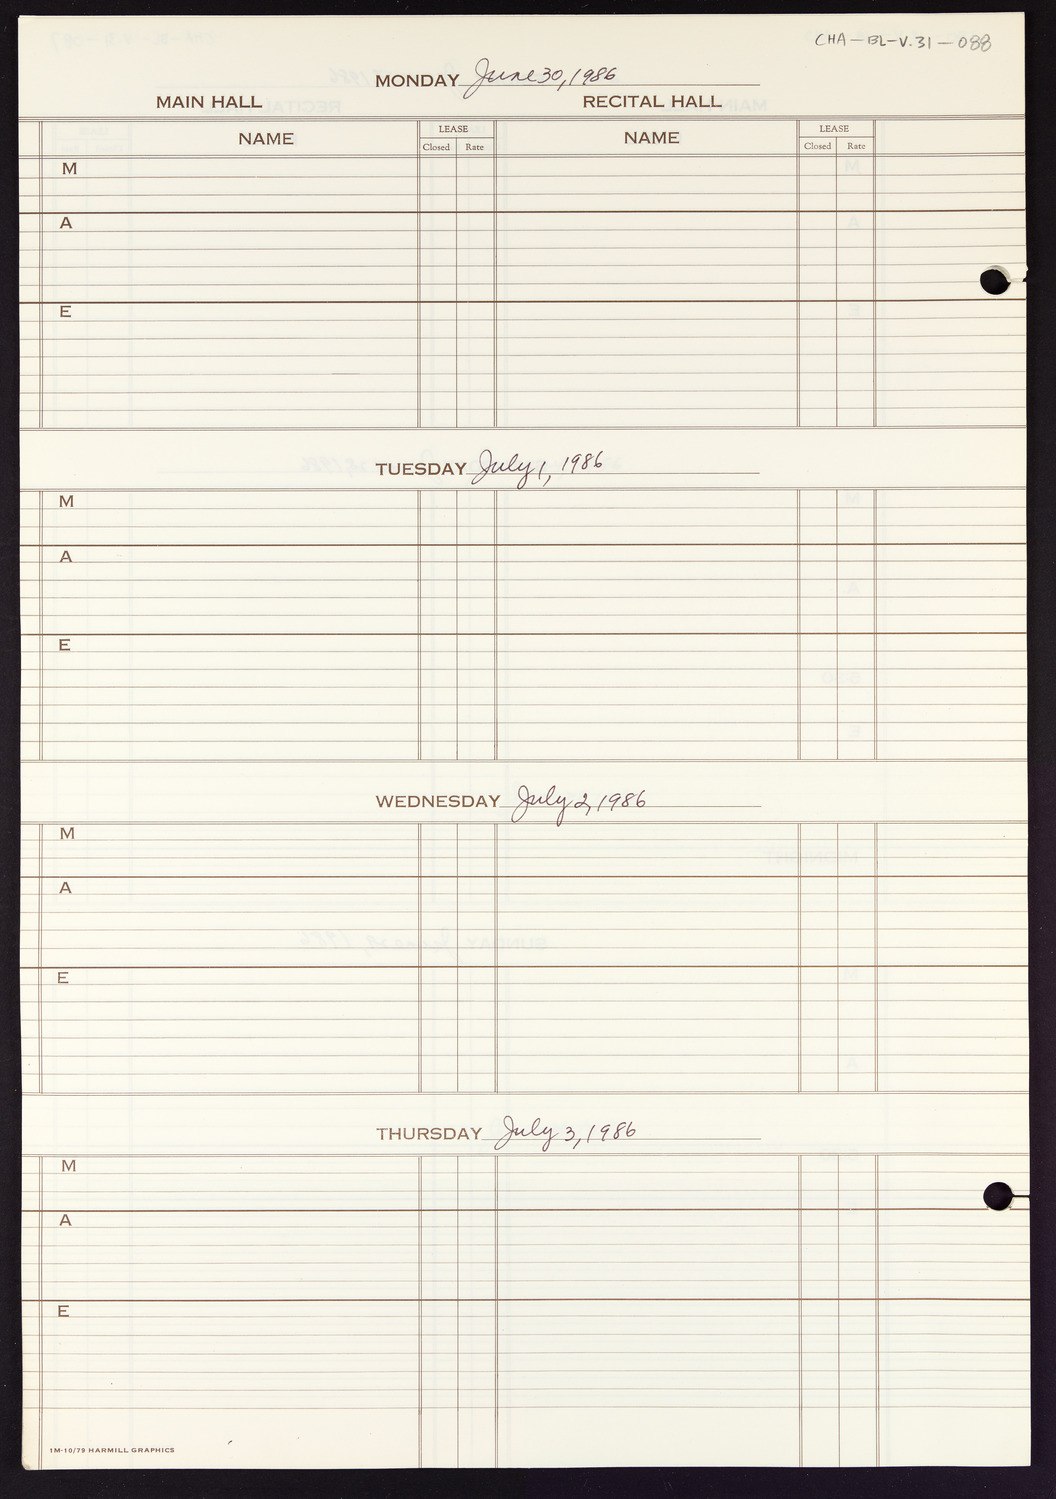 Carnegie Hall Booking Ledger, volume 31, page 88